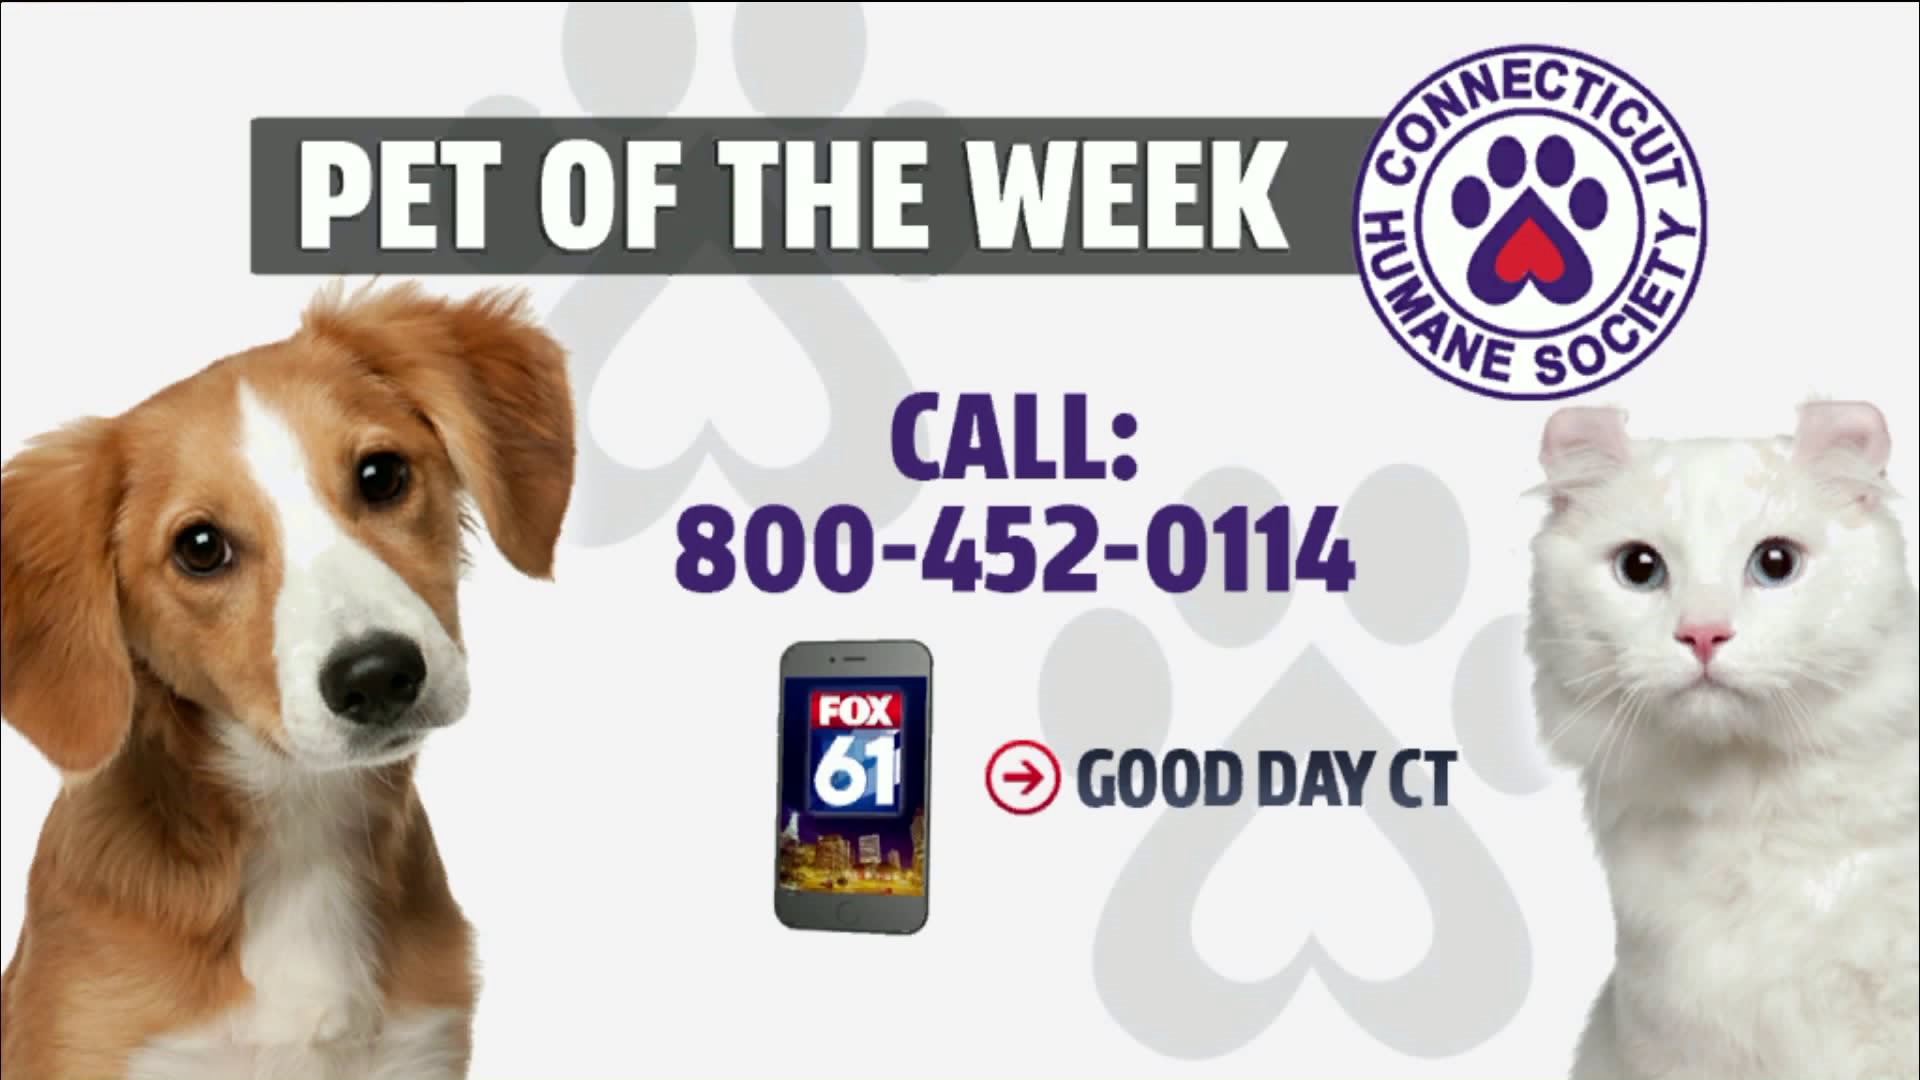 Pets of the Week - Cookie Monster and Captain Crunch